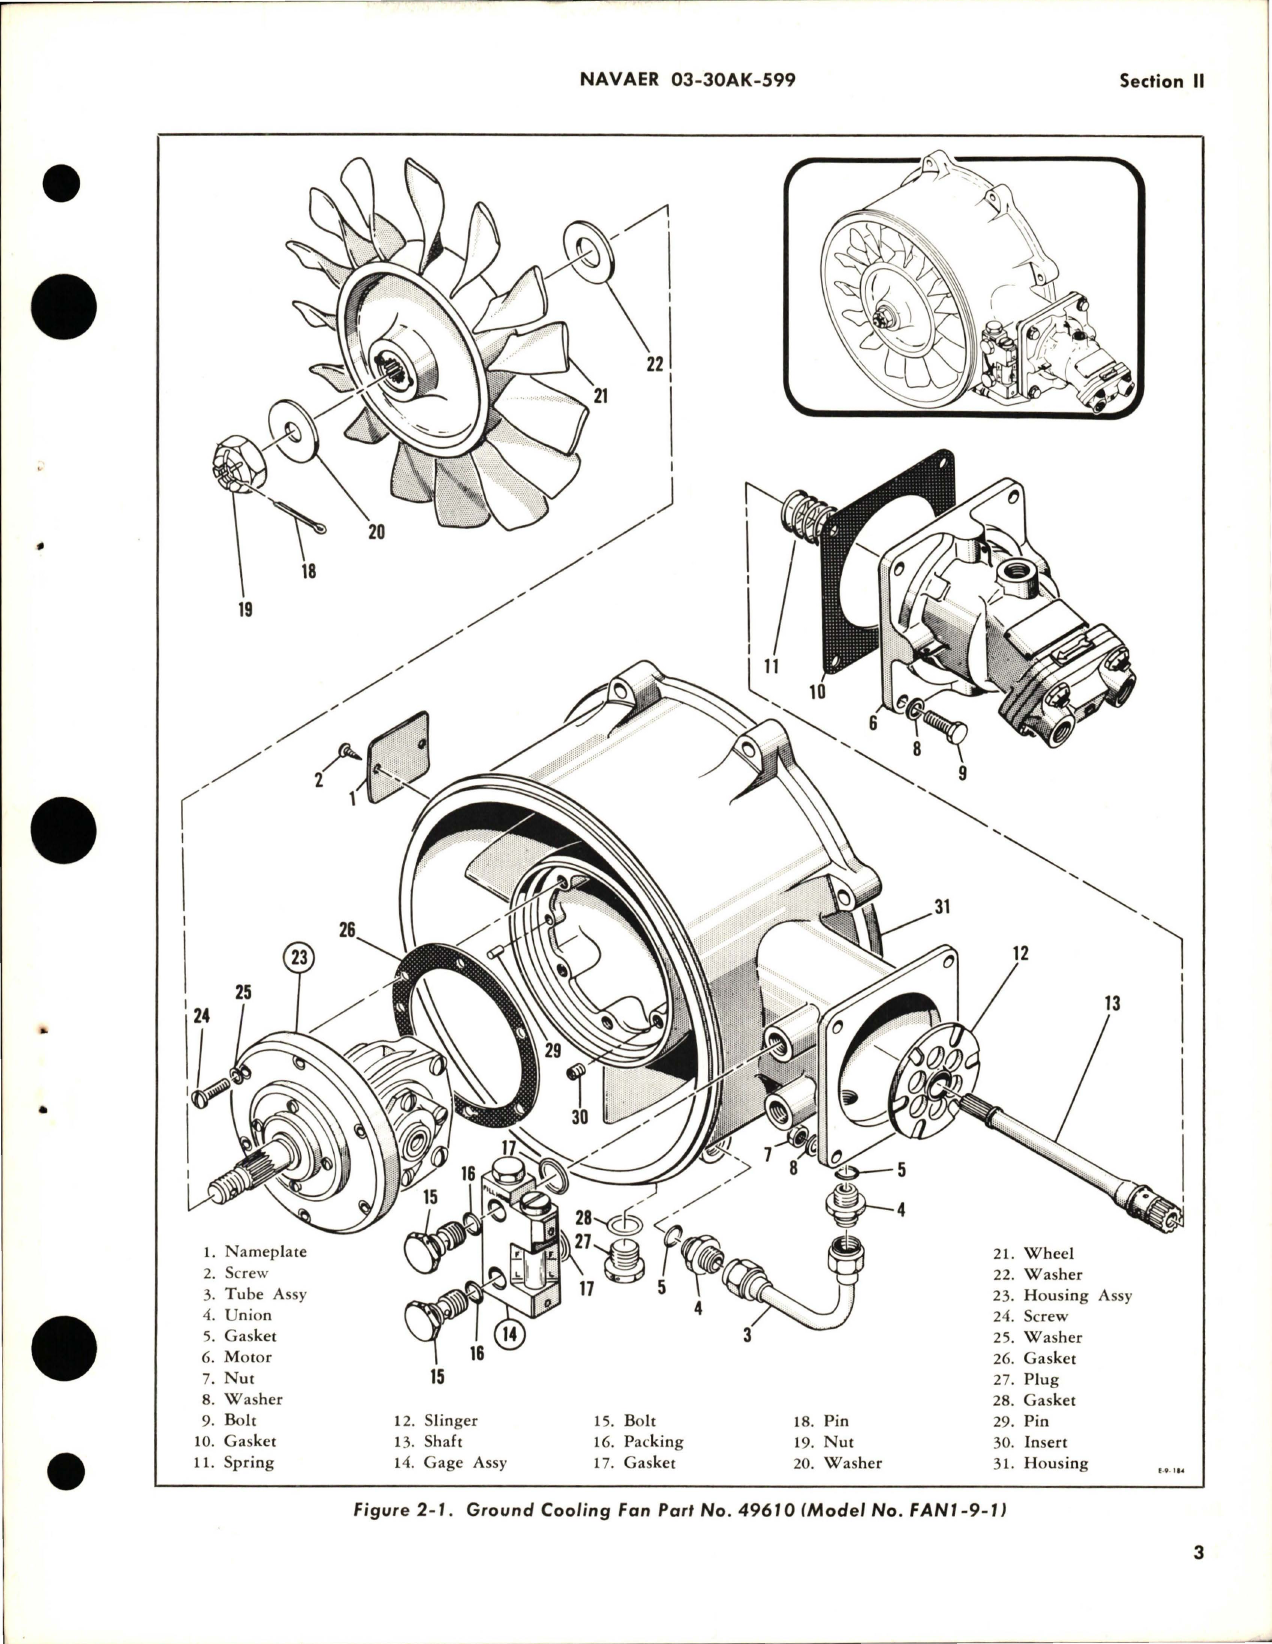 Sample page 7 from AirCorps Library document: Overhaul Instructions for Ground Cooling Fan - Part 49610 - Model FAN1-9